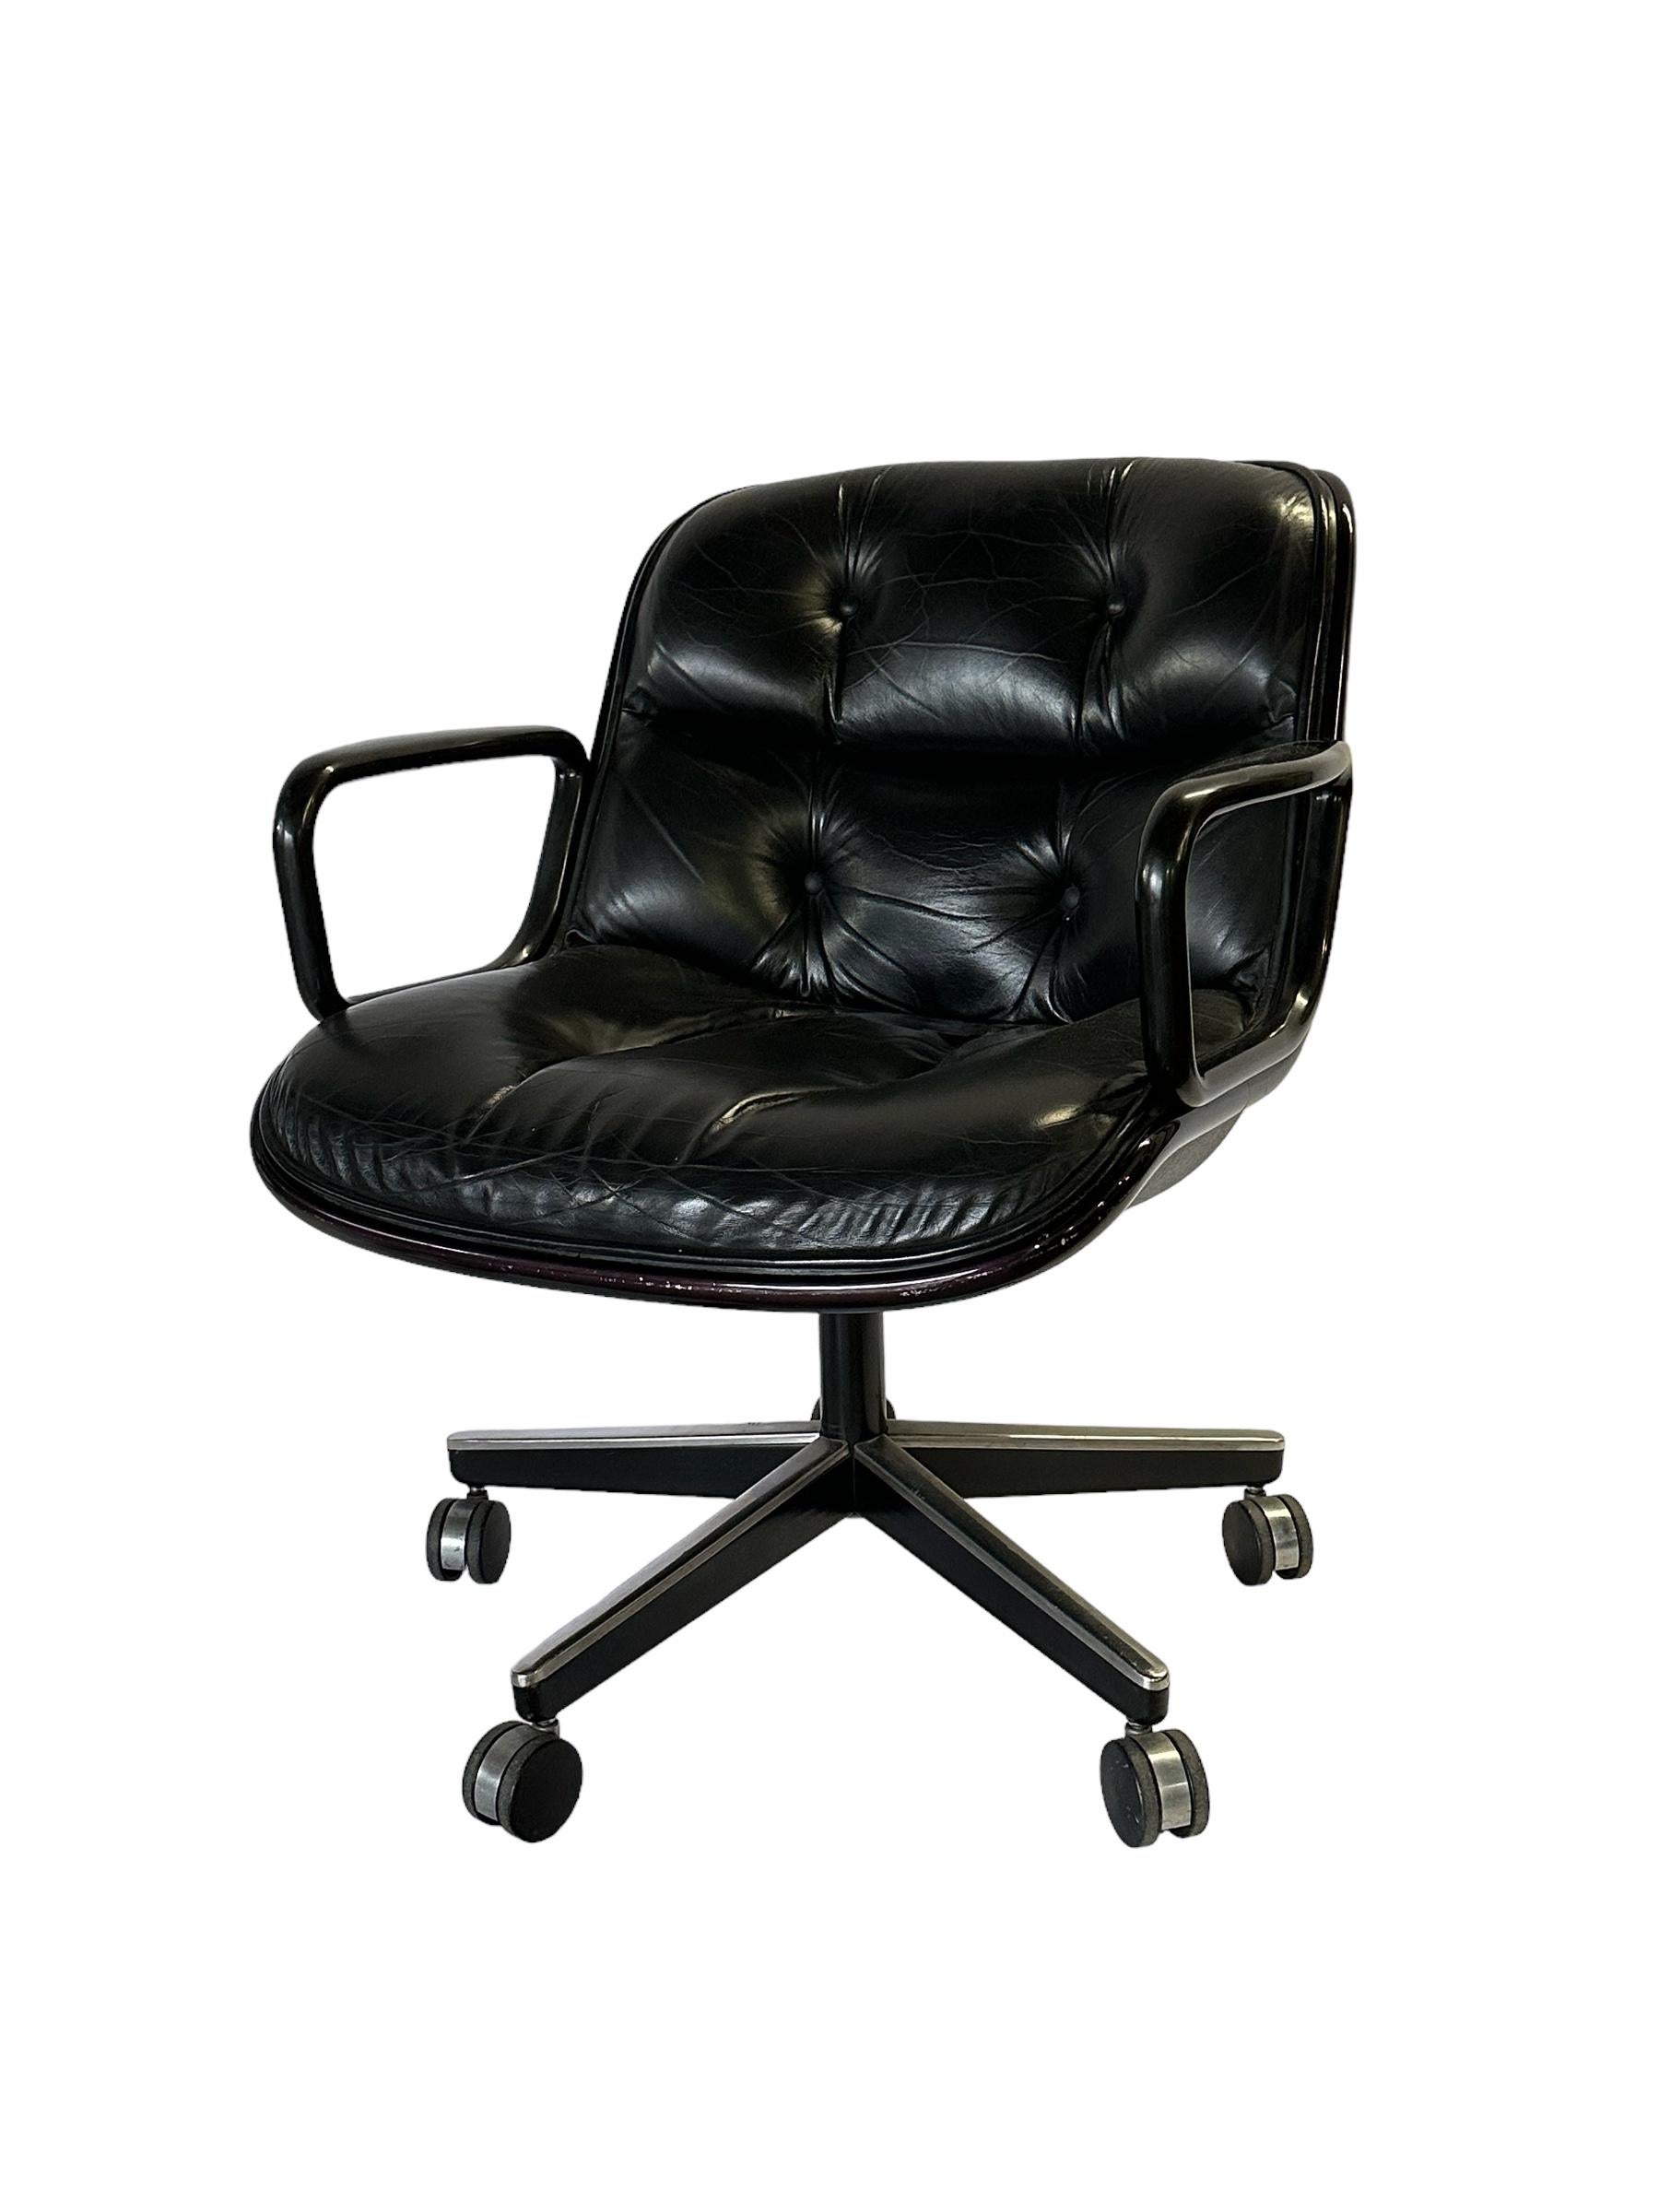 Classic Charles Pollock desk chair by Knoll. circa 1970s production executed in black leather. All screws, buttons, and wheels intact. No torn leather. Signed and guaranteed authentic. Perhaps the most comfortable desk chair out there, and certainly